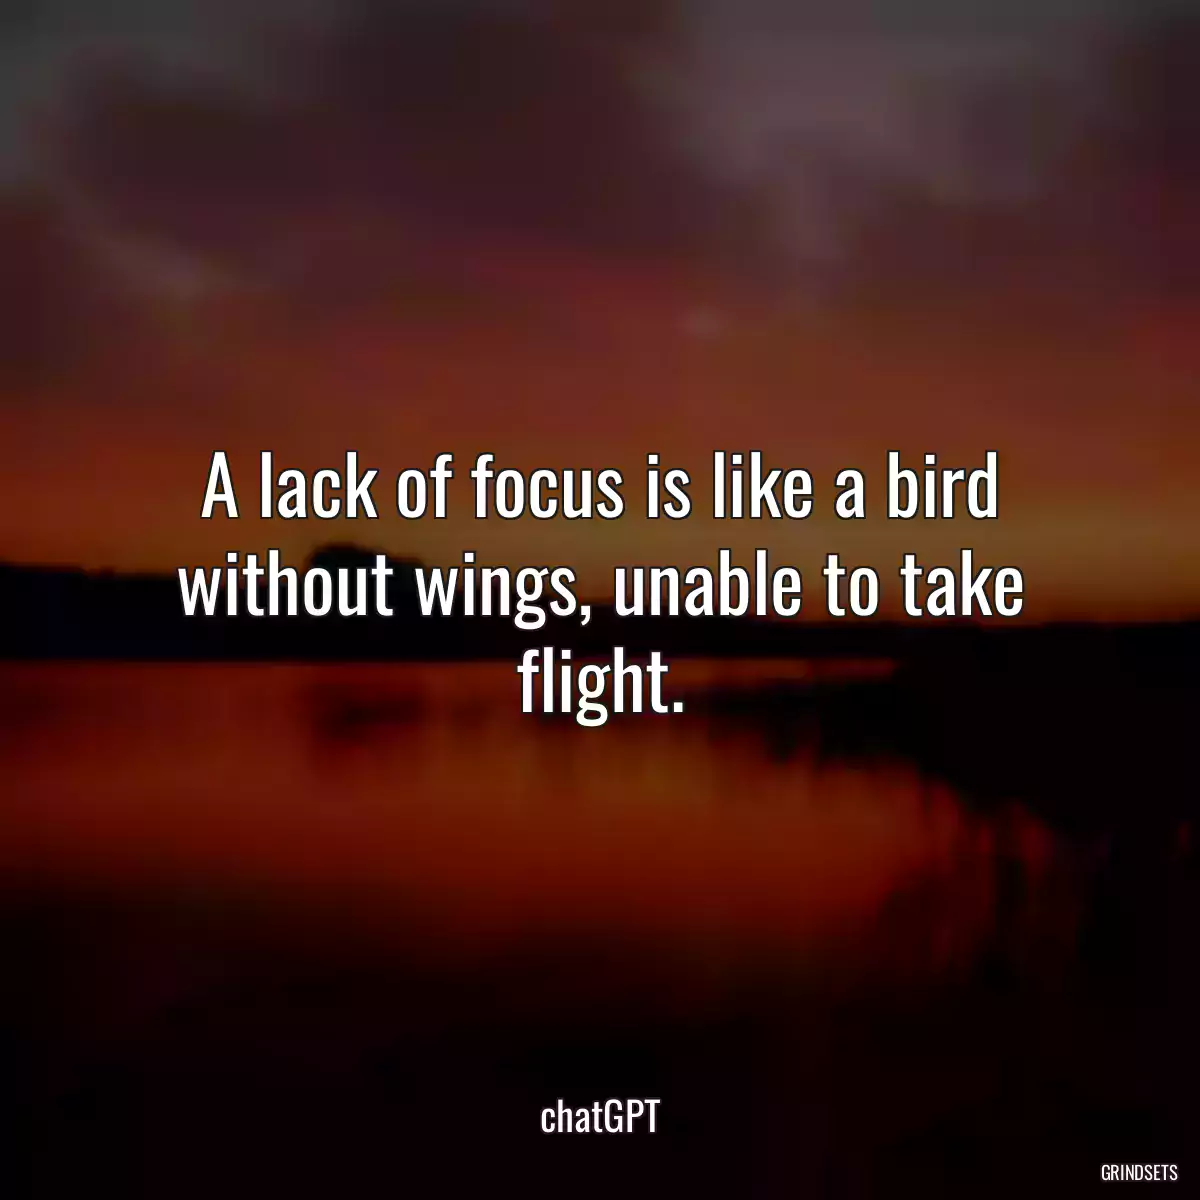 A lack of focus is like a bird without wings, unable to take flight.